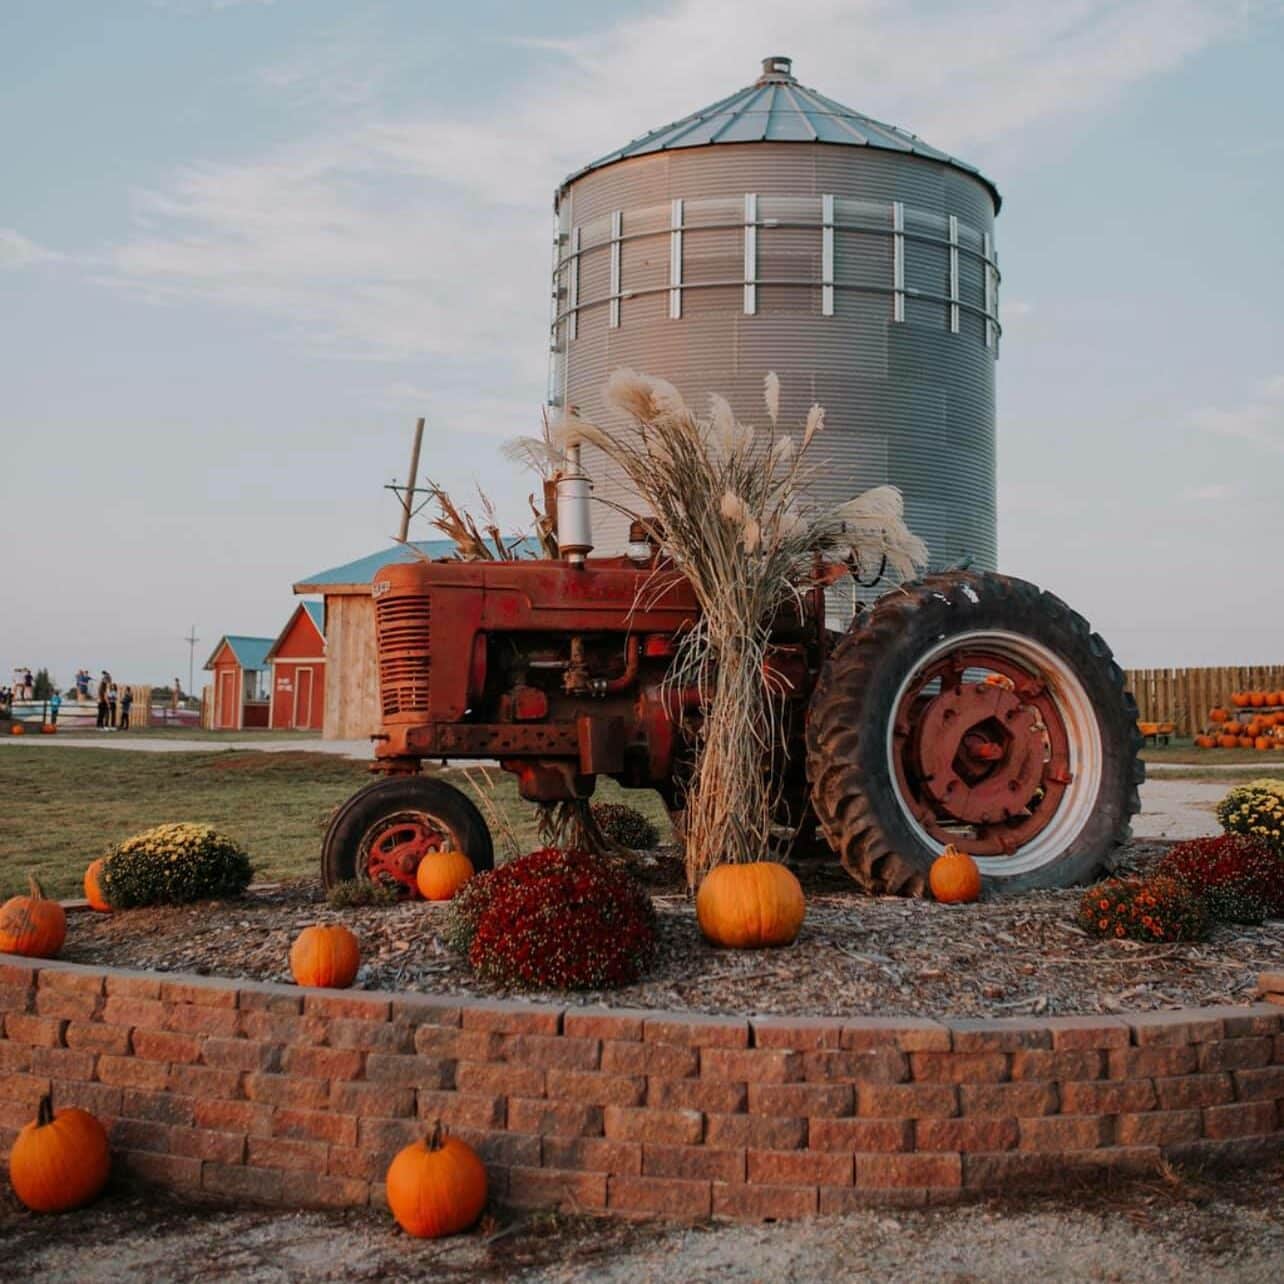 Skinny Bones Pumpkin Patch silo and old tractor with pumpkins scattered around.